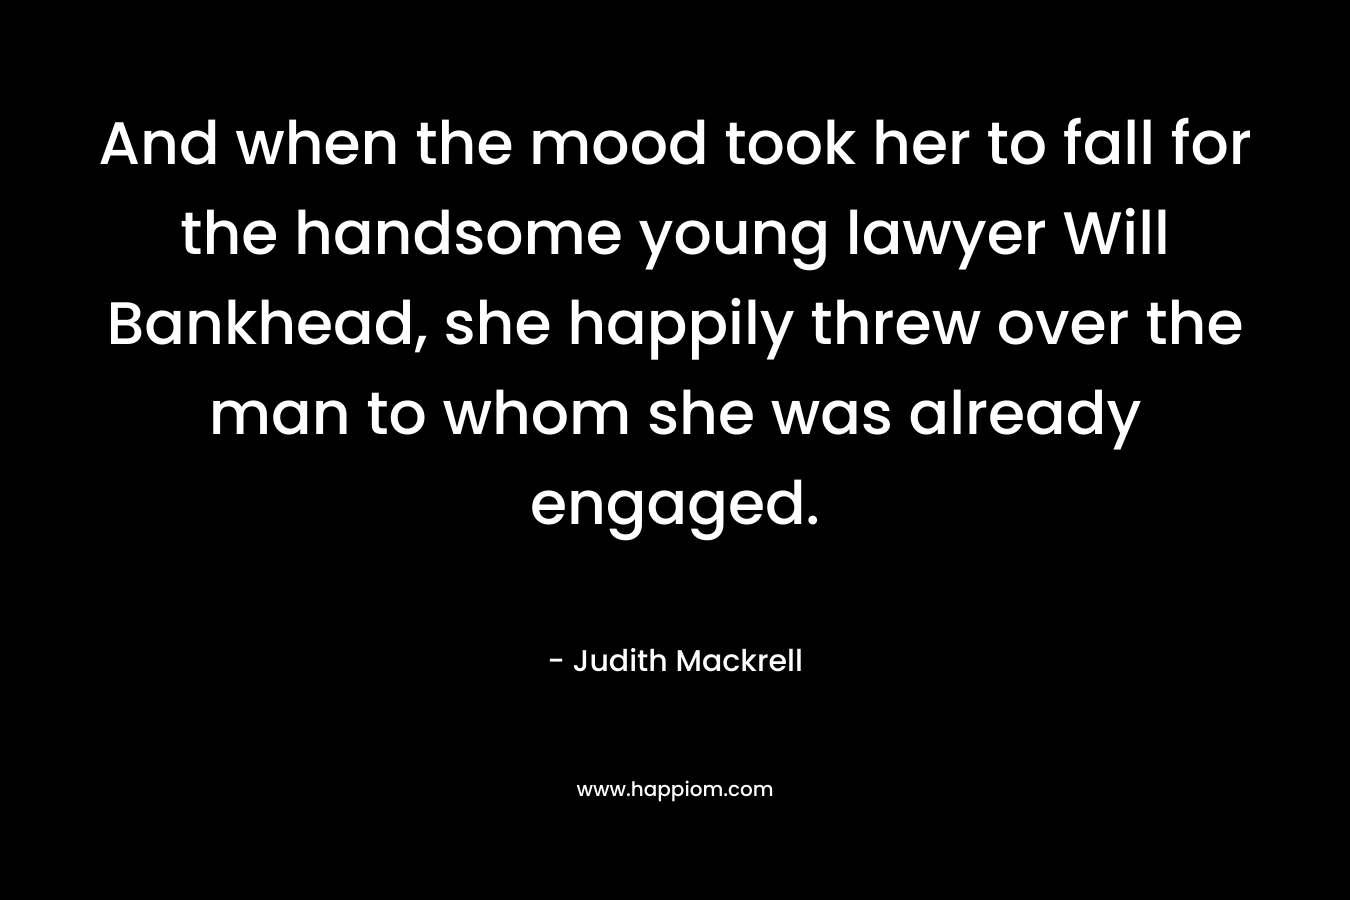 And when the mood took her to fall for the handsome young lawyer Will Bankhead, she happily threw over the man to whom she was already engaged.